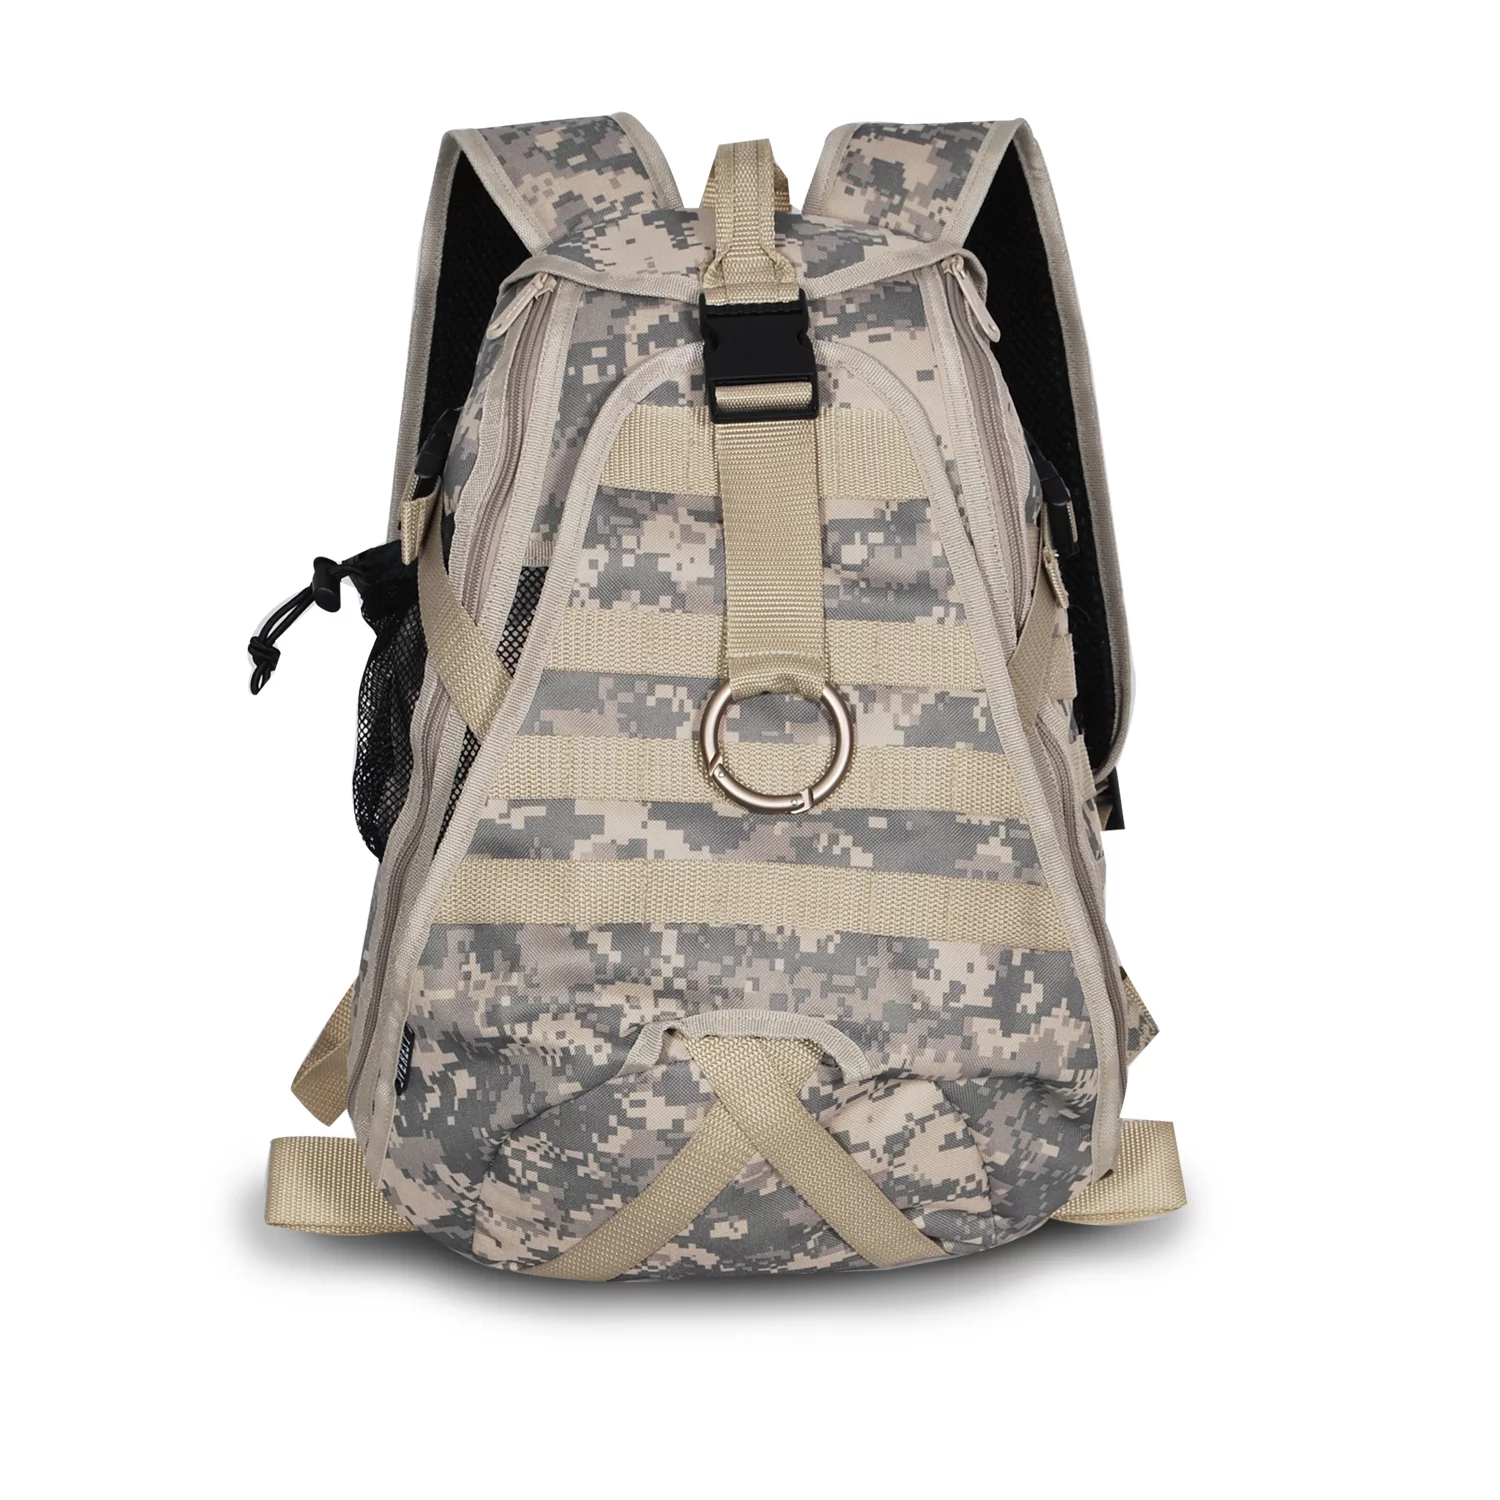 Adult Backpack Camo with Monogram